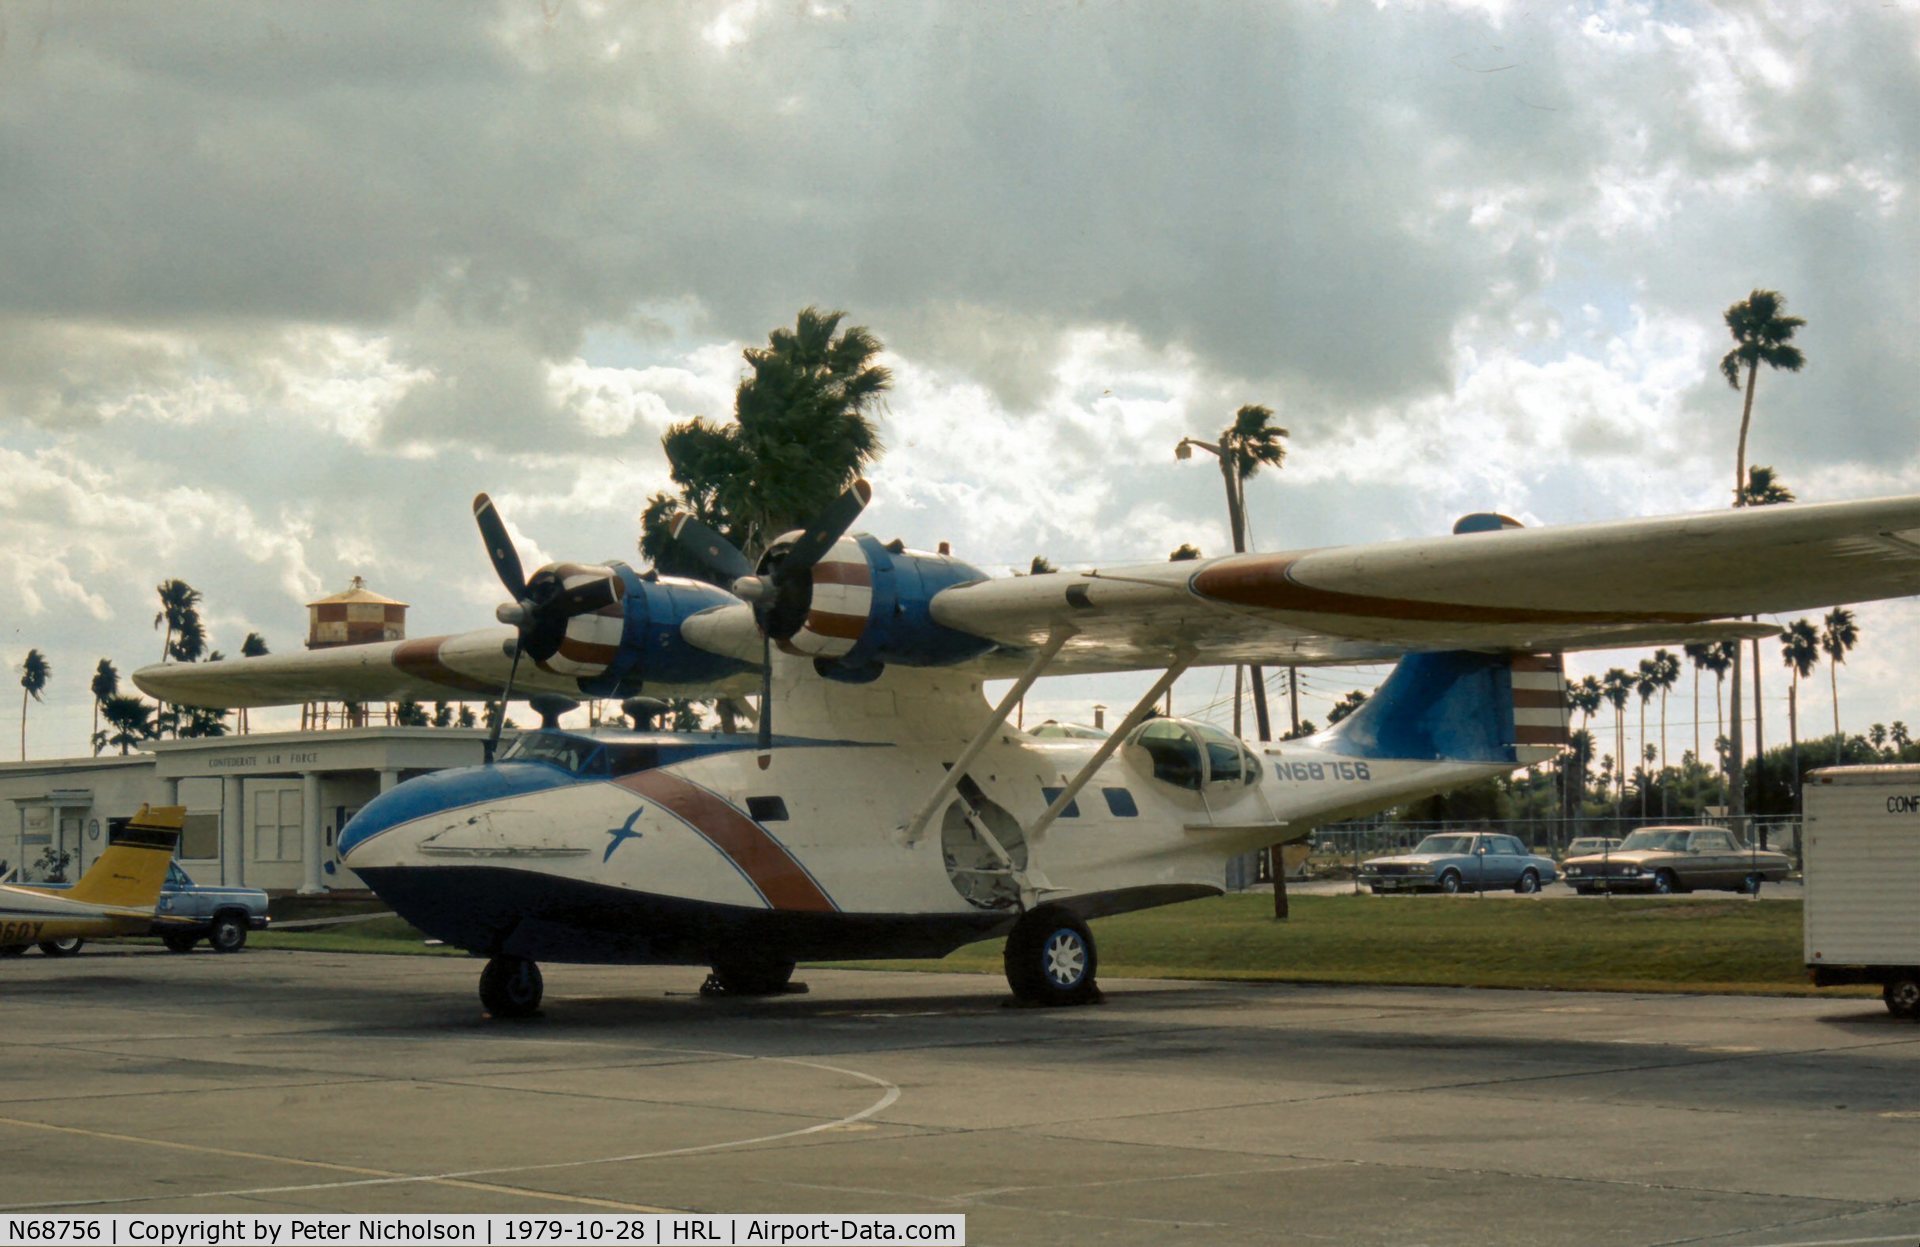 N68756, Consolidated Vultee 28-5ACF C/N 1954 (USN46590), Another view of the PBY Catalina derivative at the Confederate Air Force's Harlingen base in October 1979.